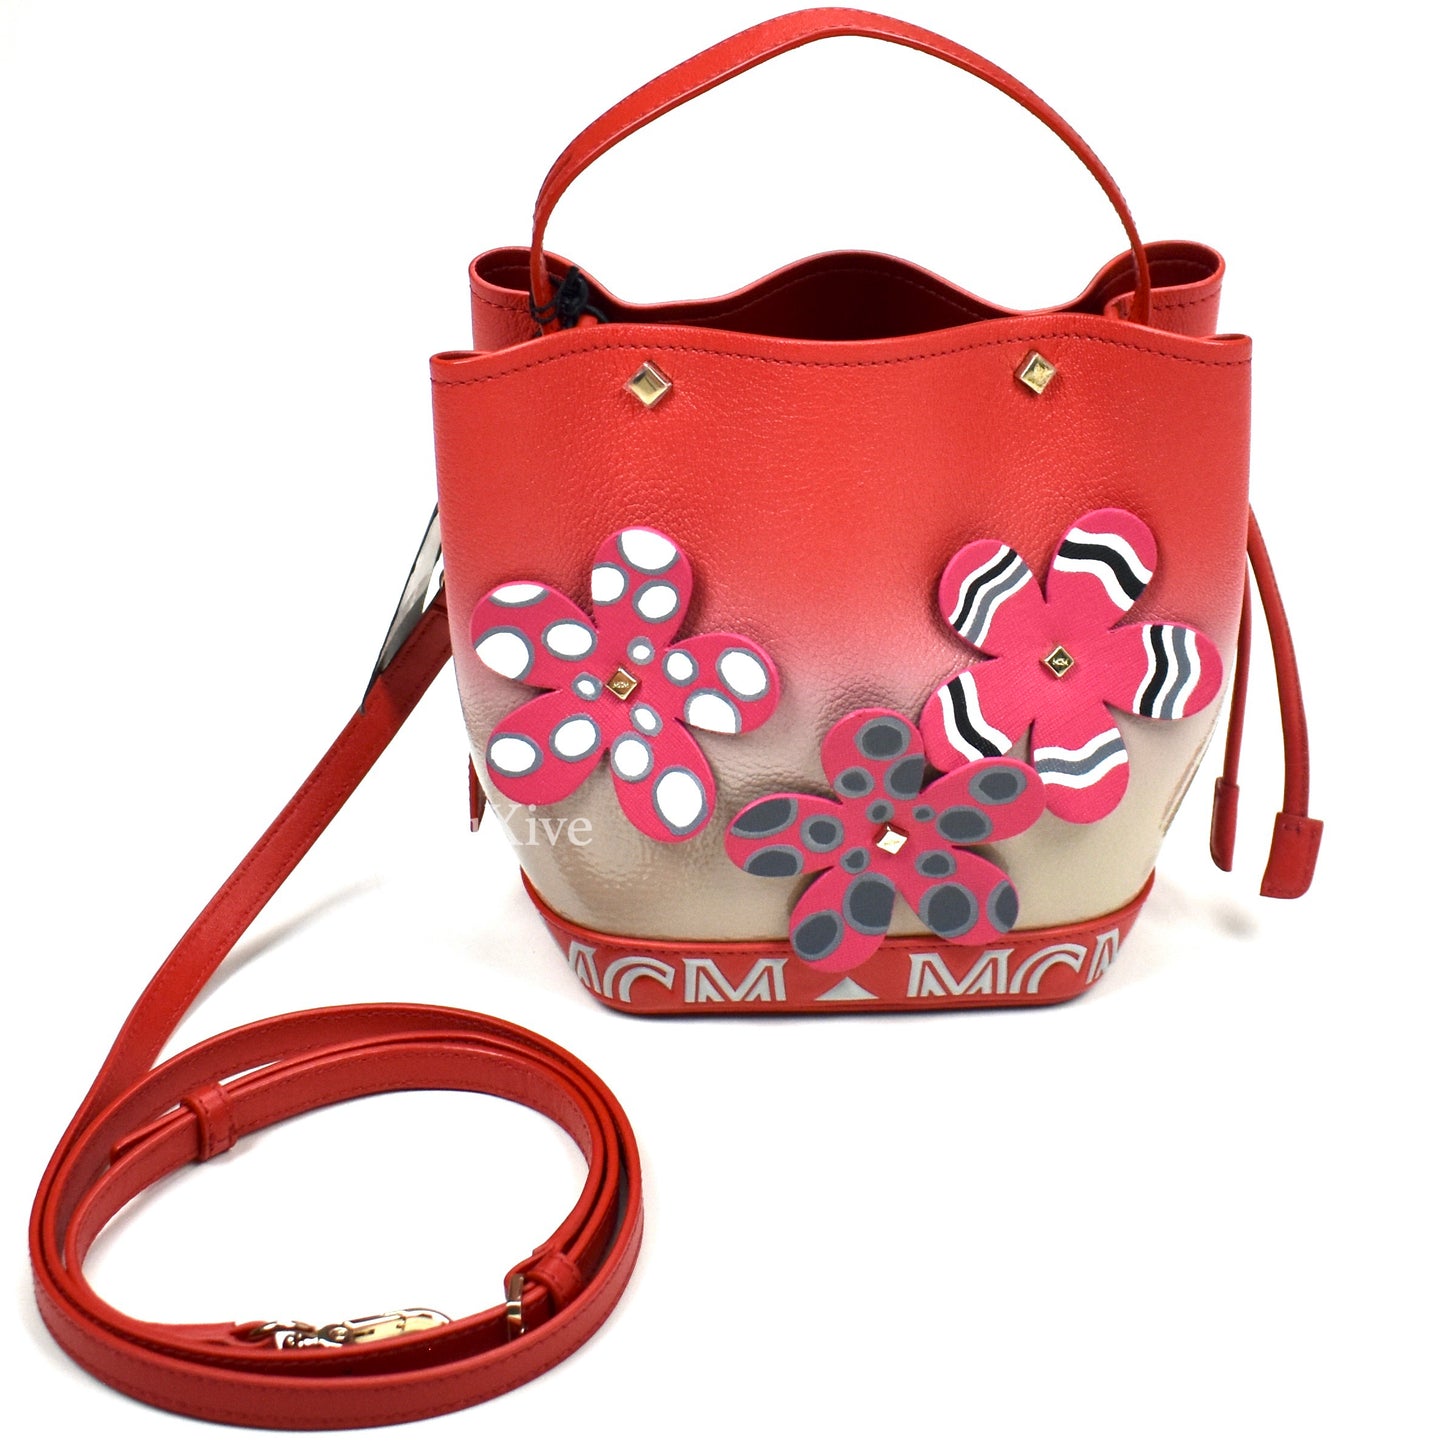 MCM - Limited Edition 'Upcyling' Red Floral Leather Bag